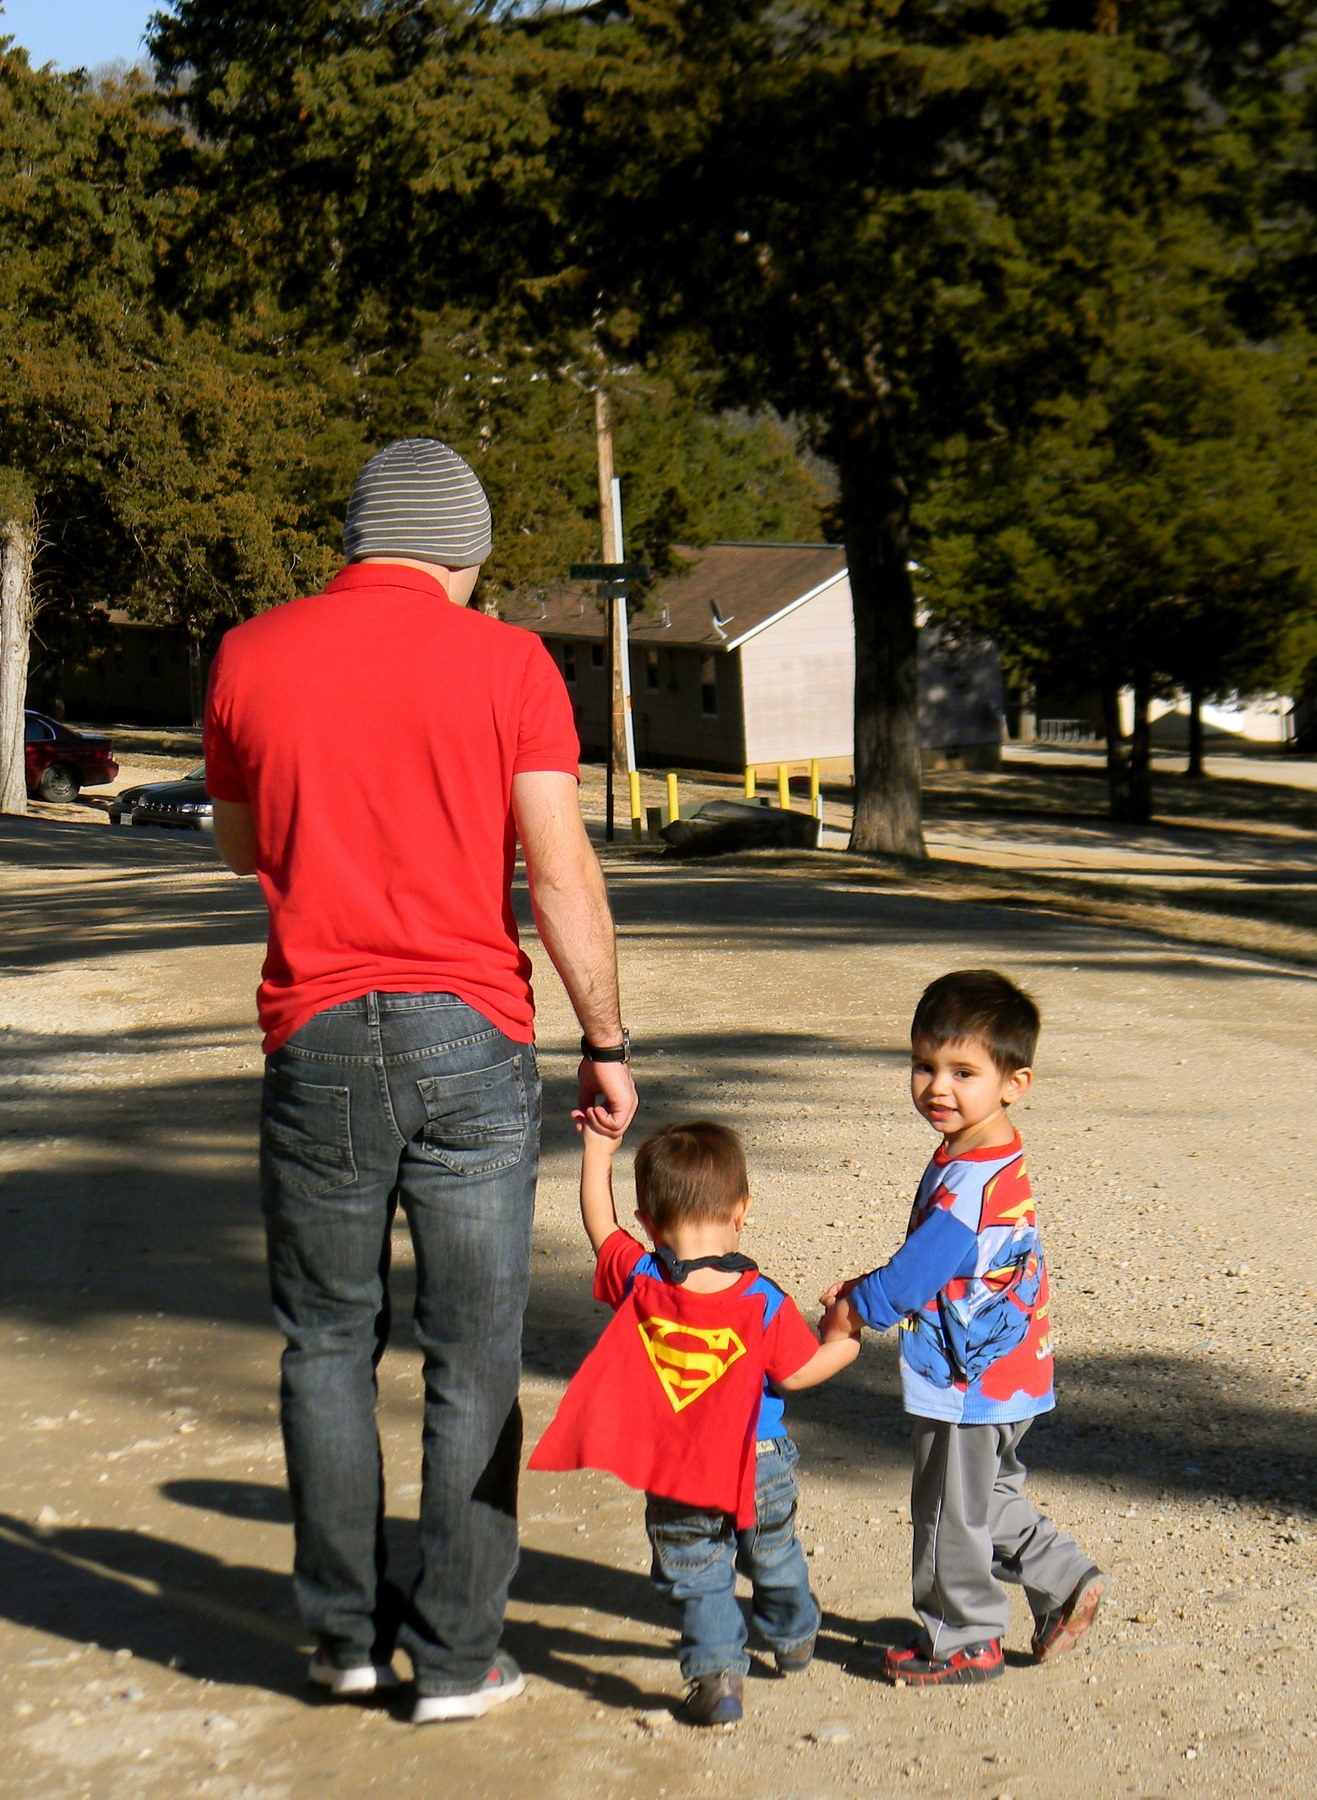 Super-Dad with his two little superheroes.